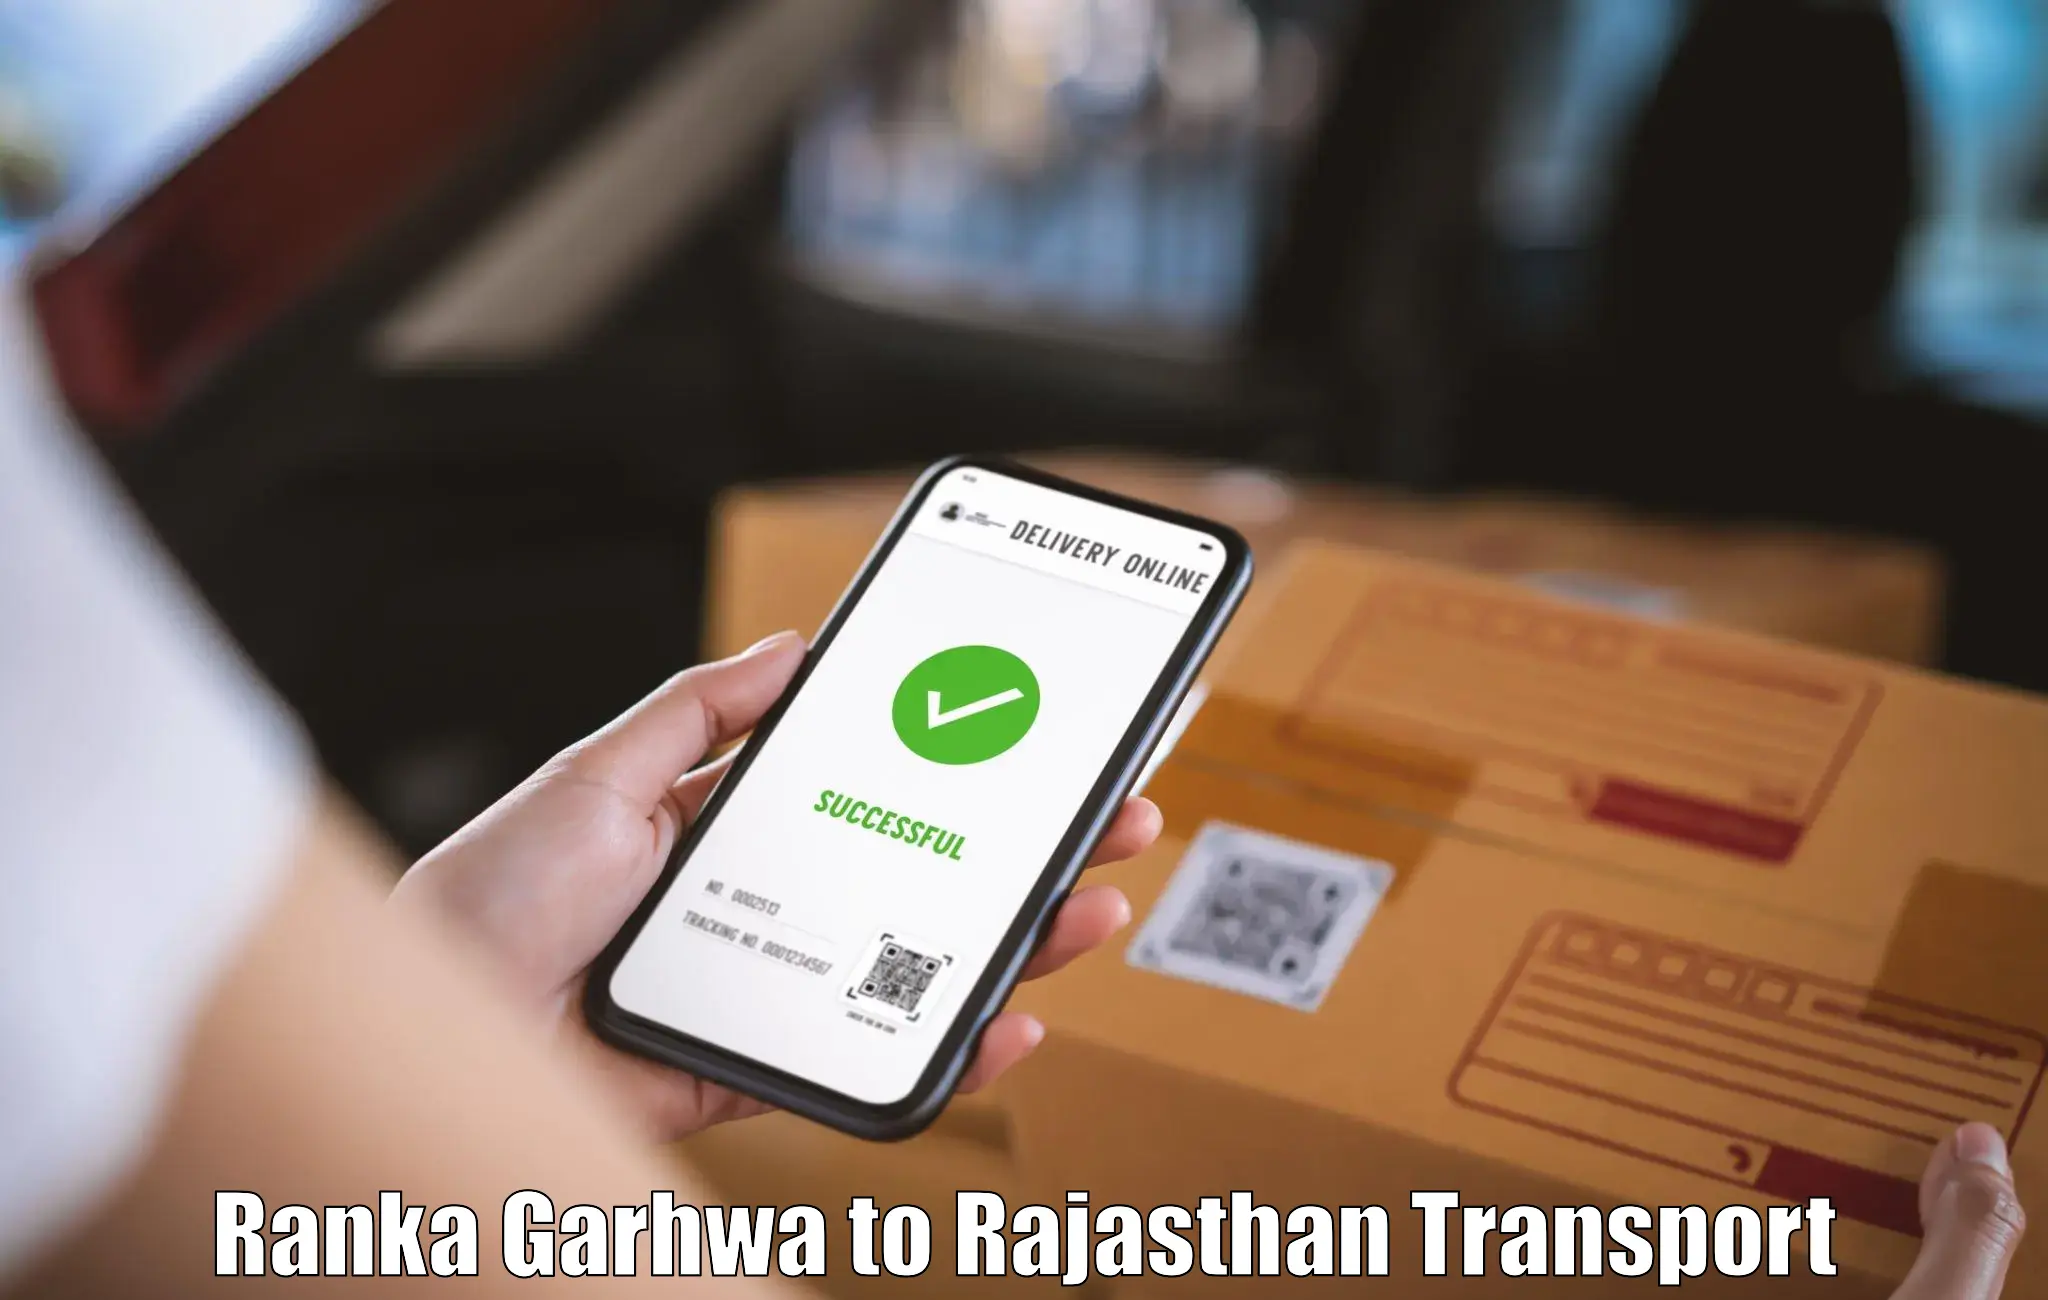 Air freight transport services Ranka Garhwa to Piparcity